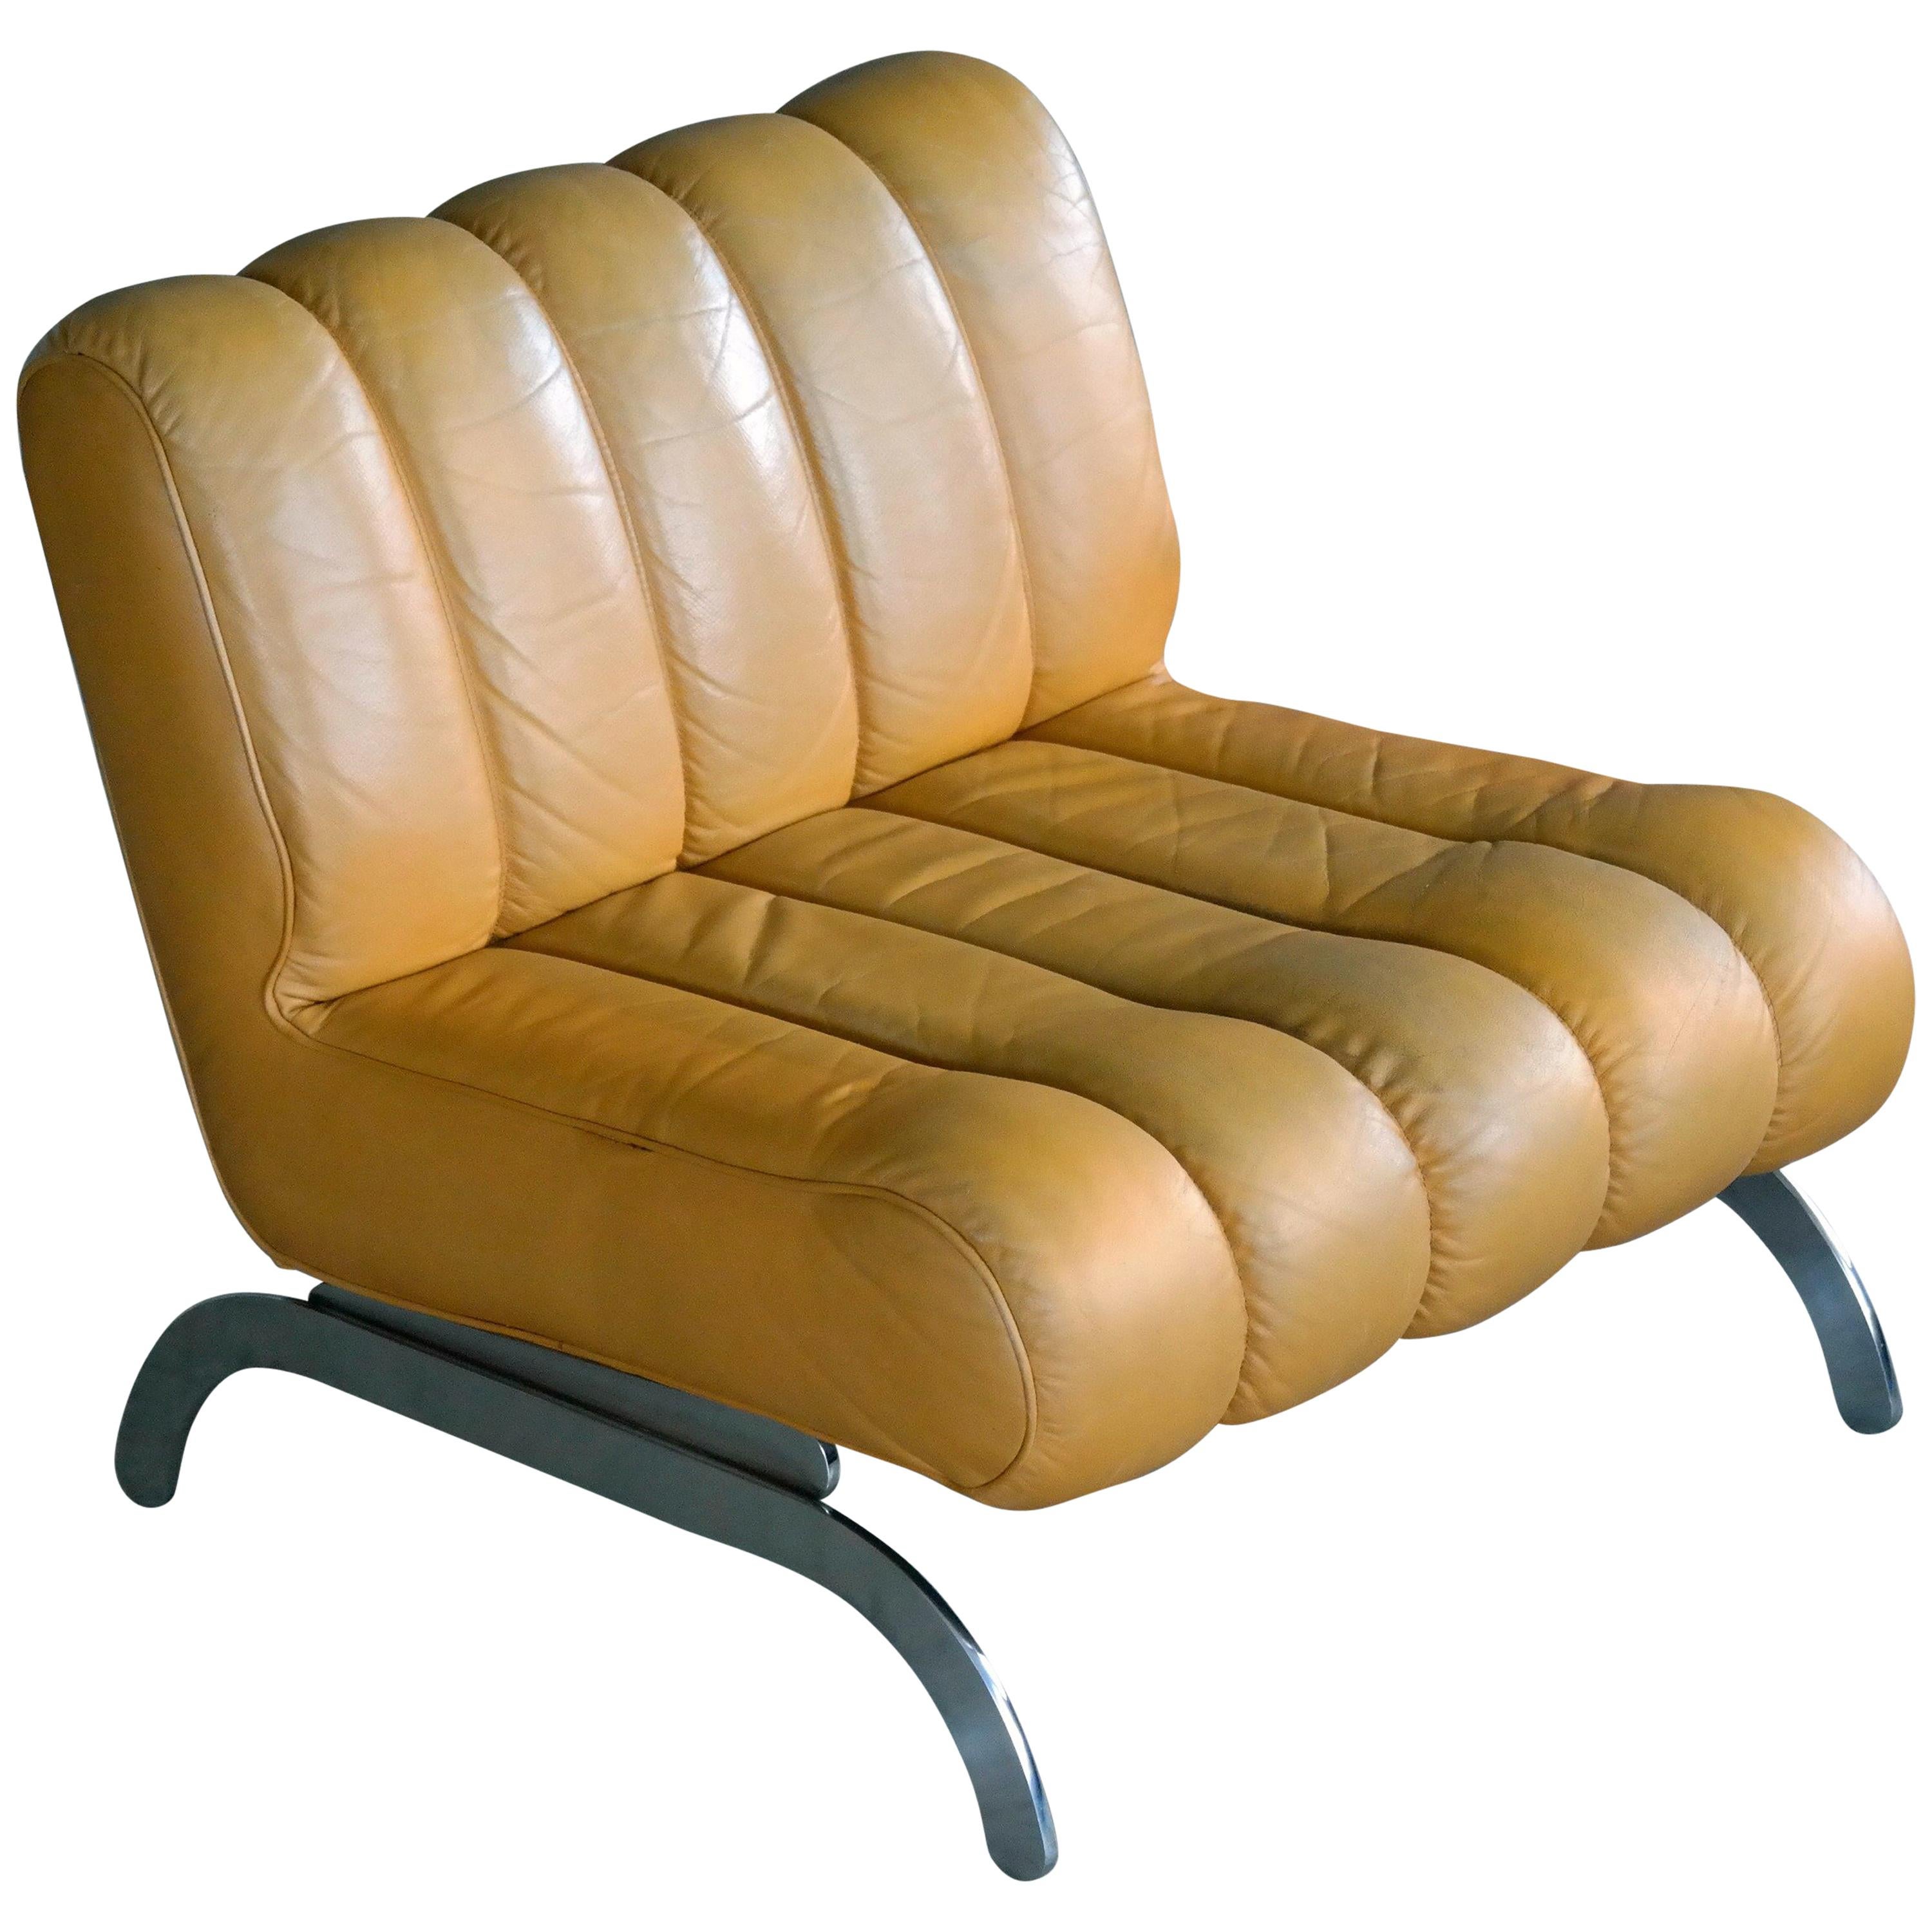 Wittmann Lounge Chairs 12 For Sale At 1stdibs